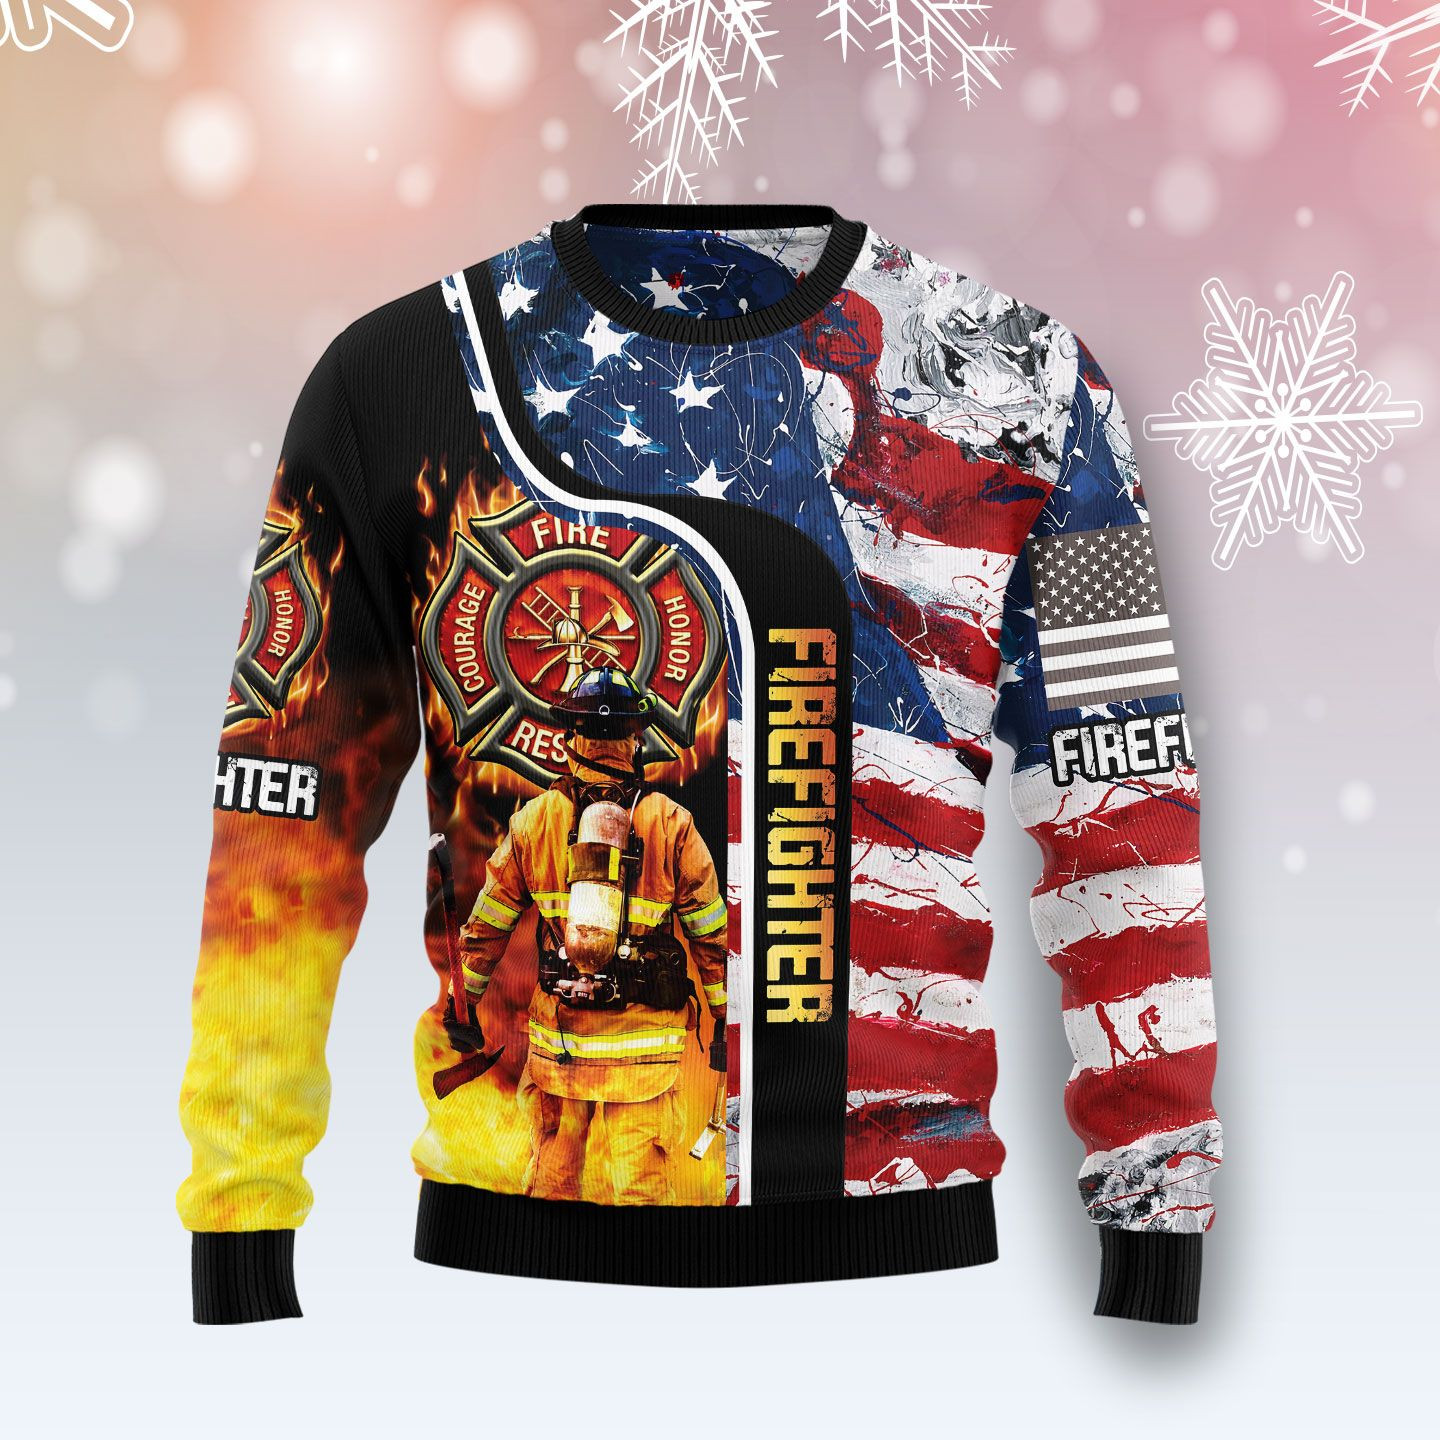 Firefighter USA Flag Ugly Christmas Sweater Ugly Sweater For Men Women